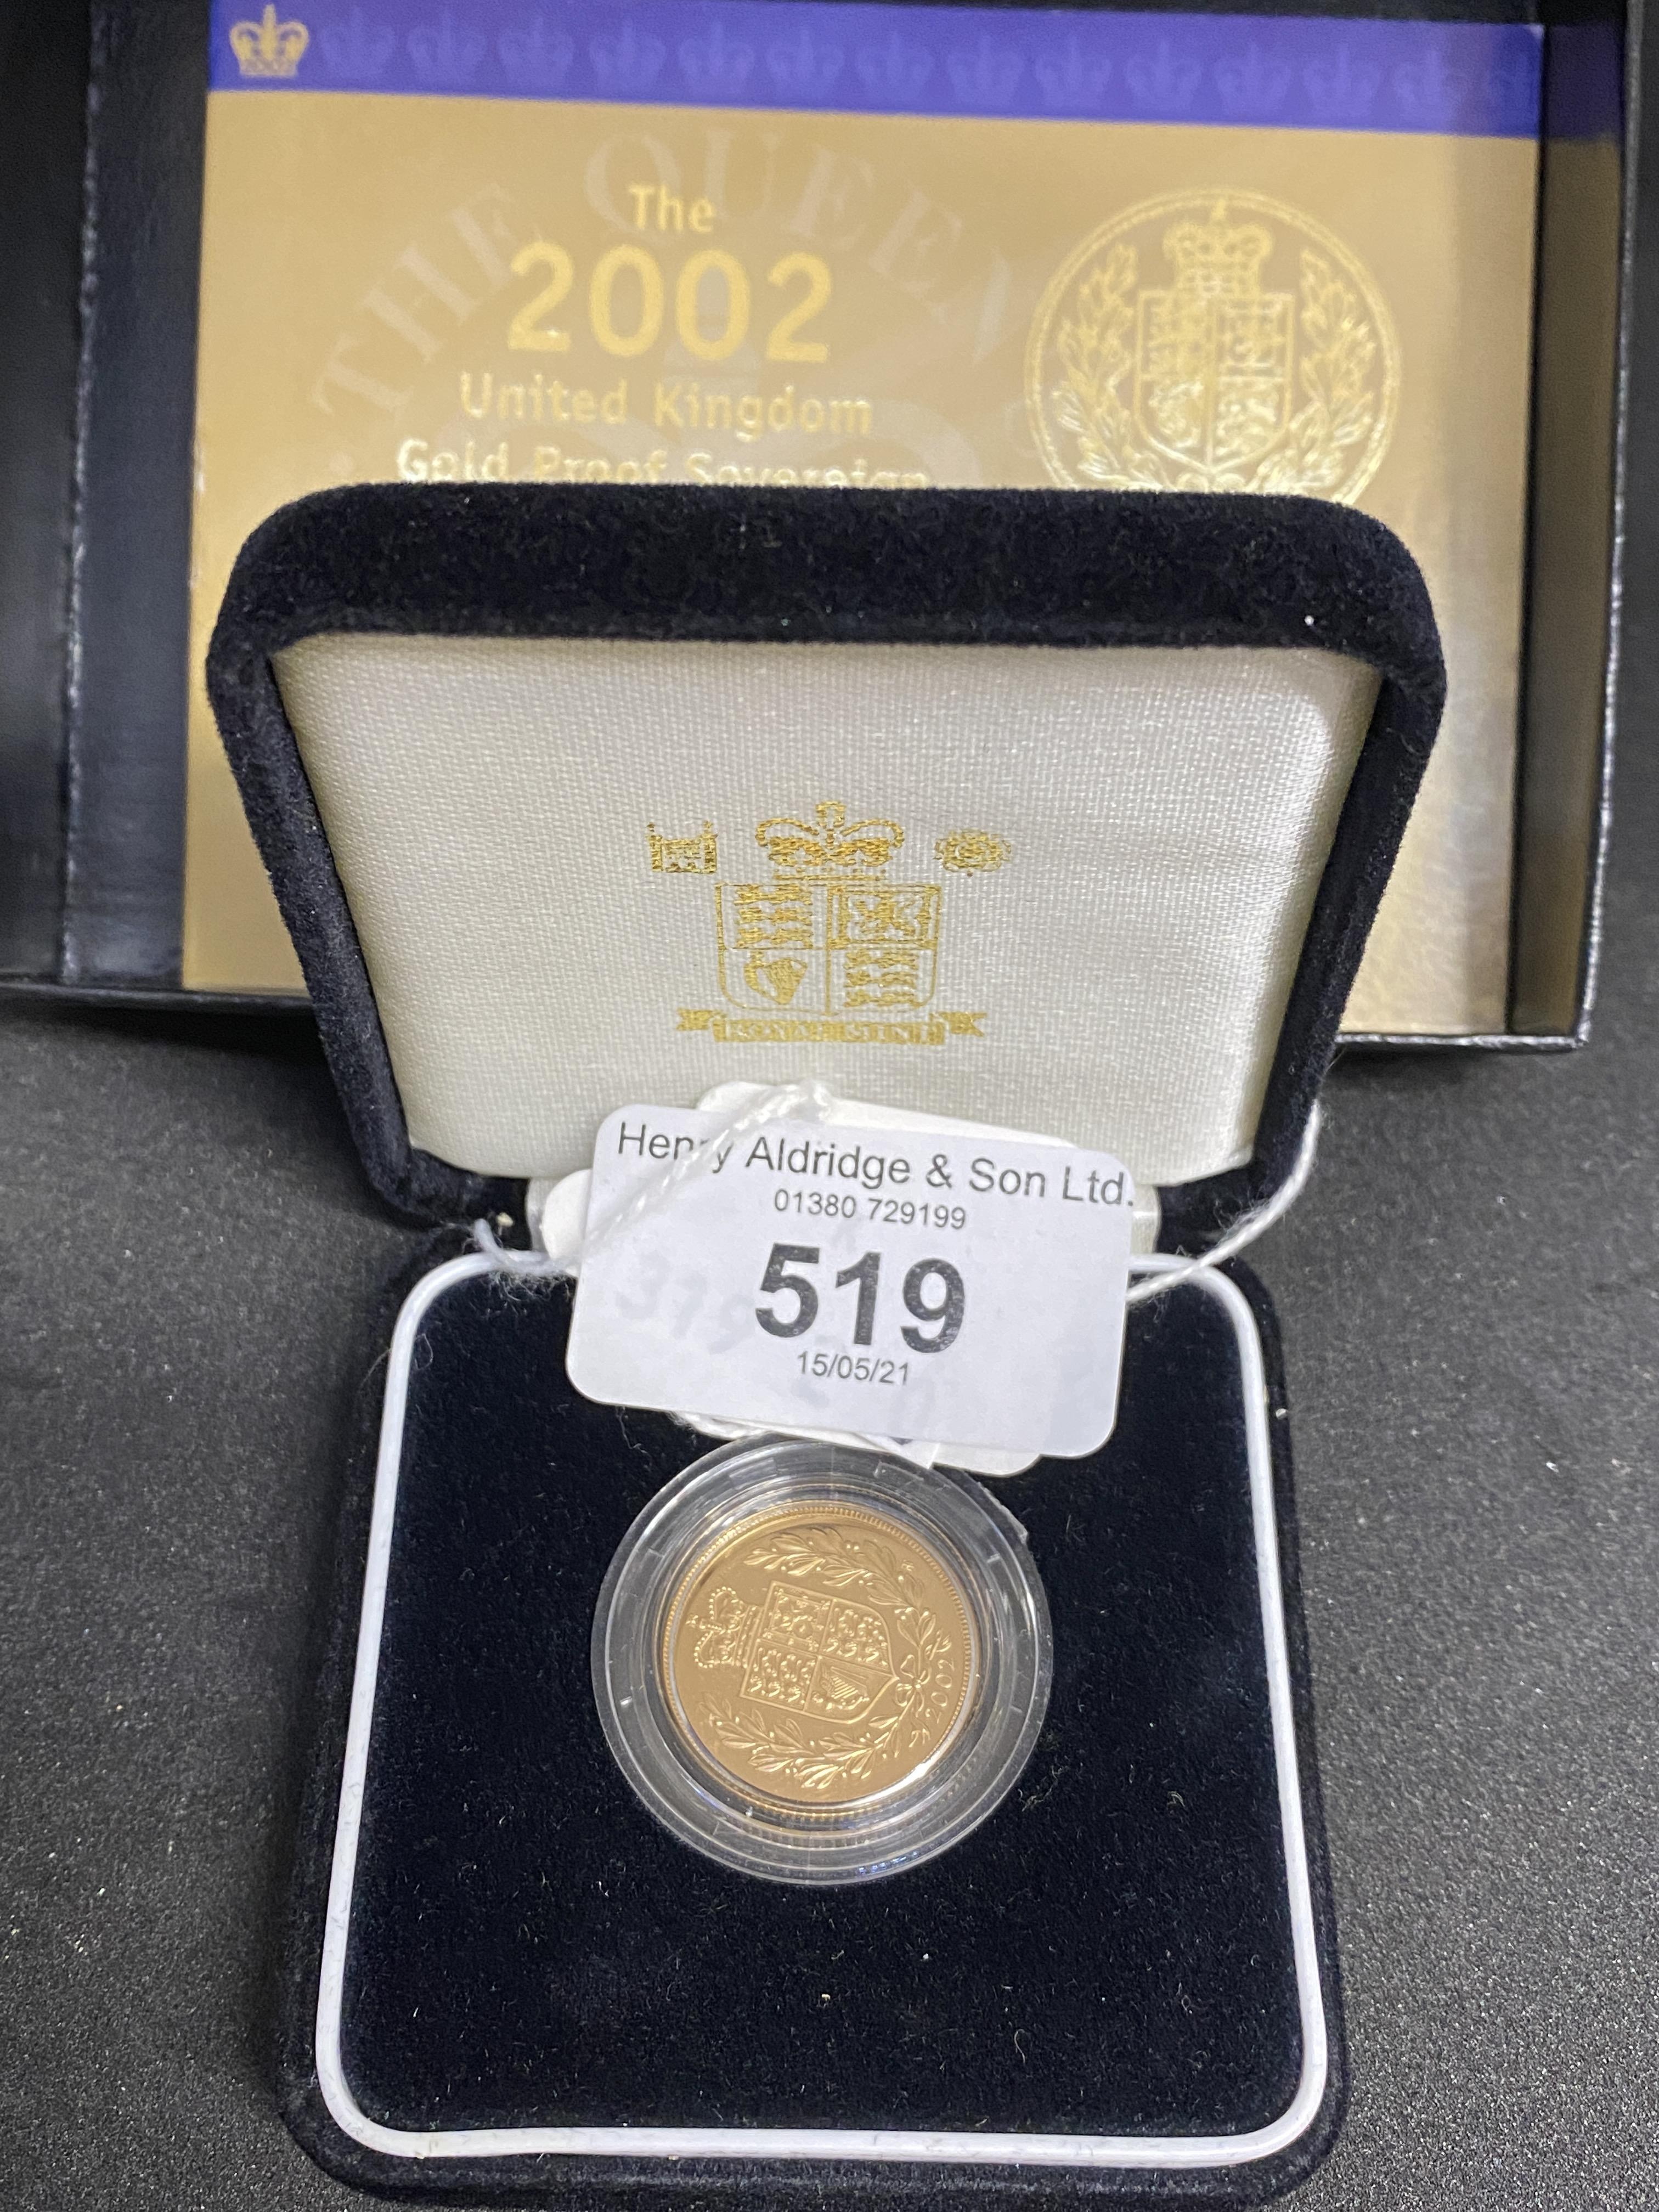 Numismatics: Gold coin Elizabeth II Proof Sovereign 2002. Boxed.